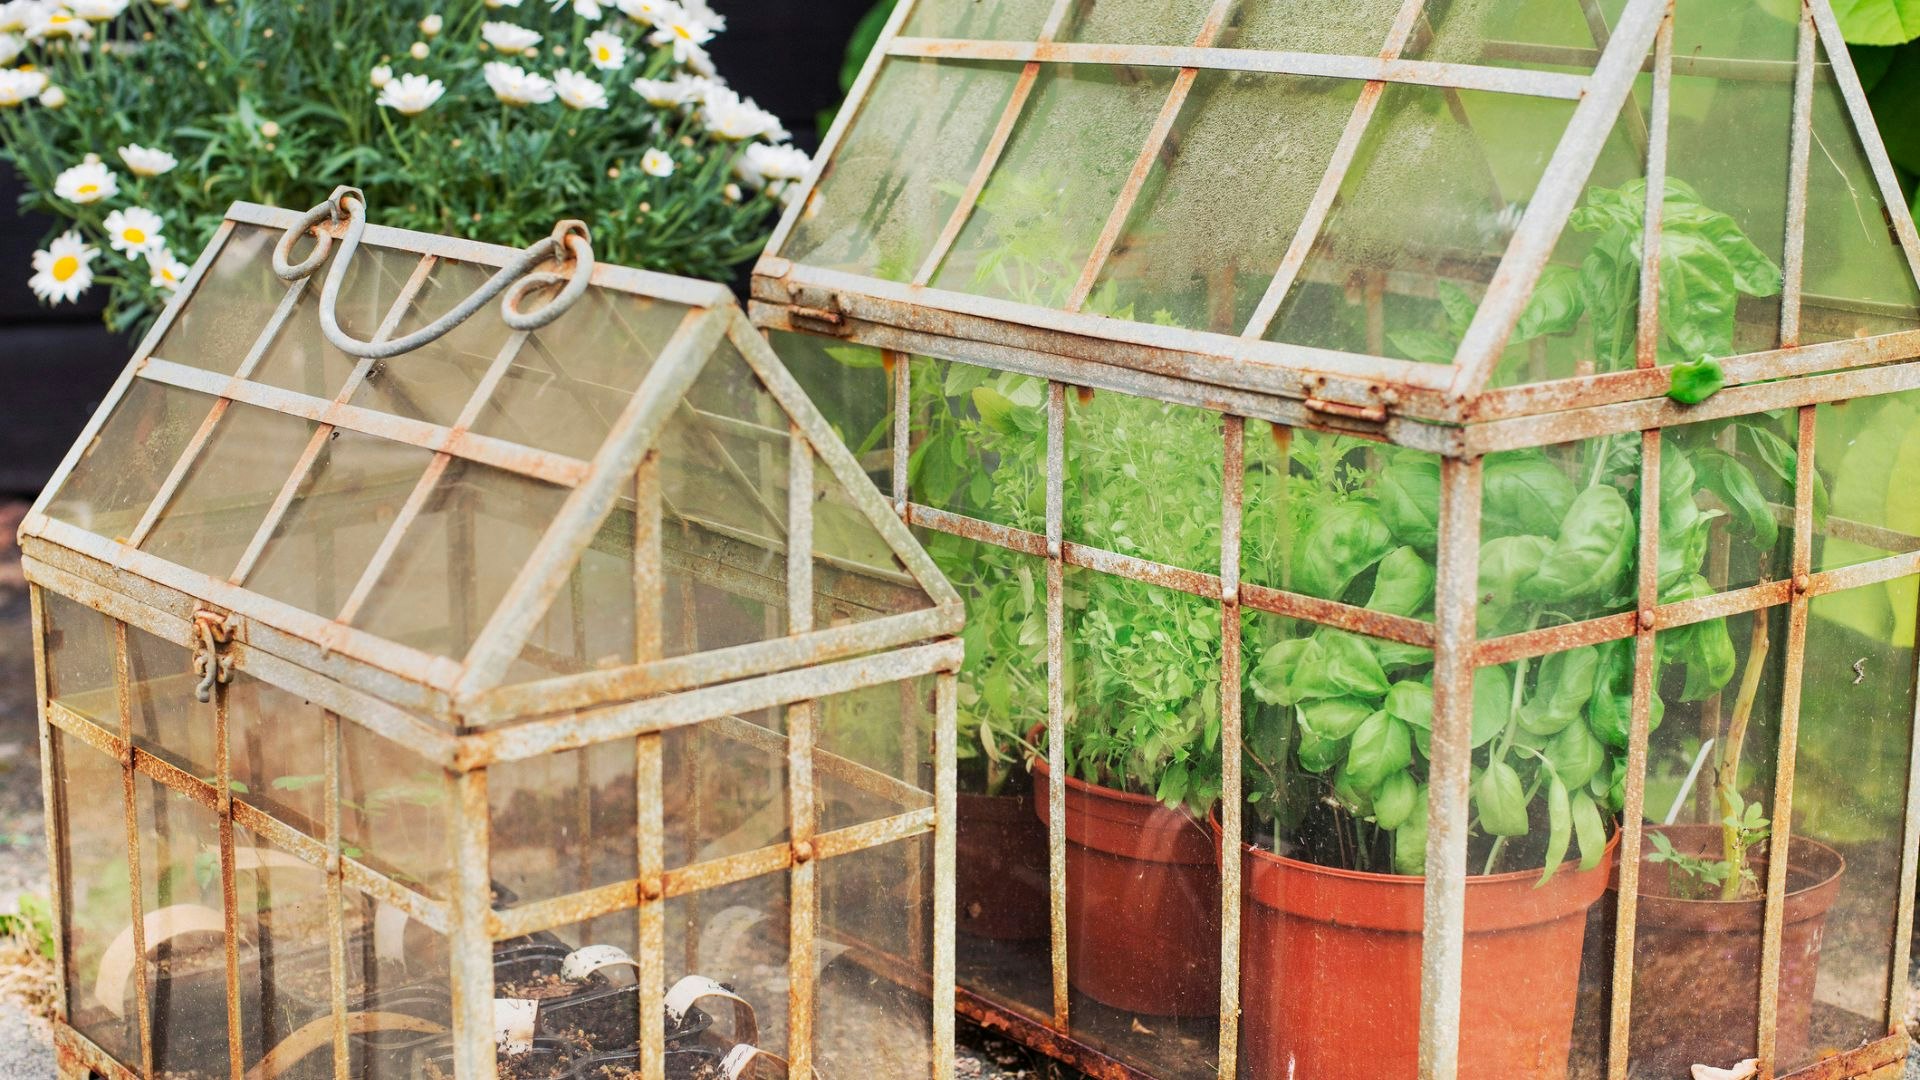 Plants in small greenhouses